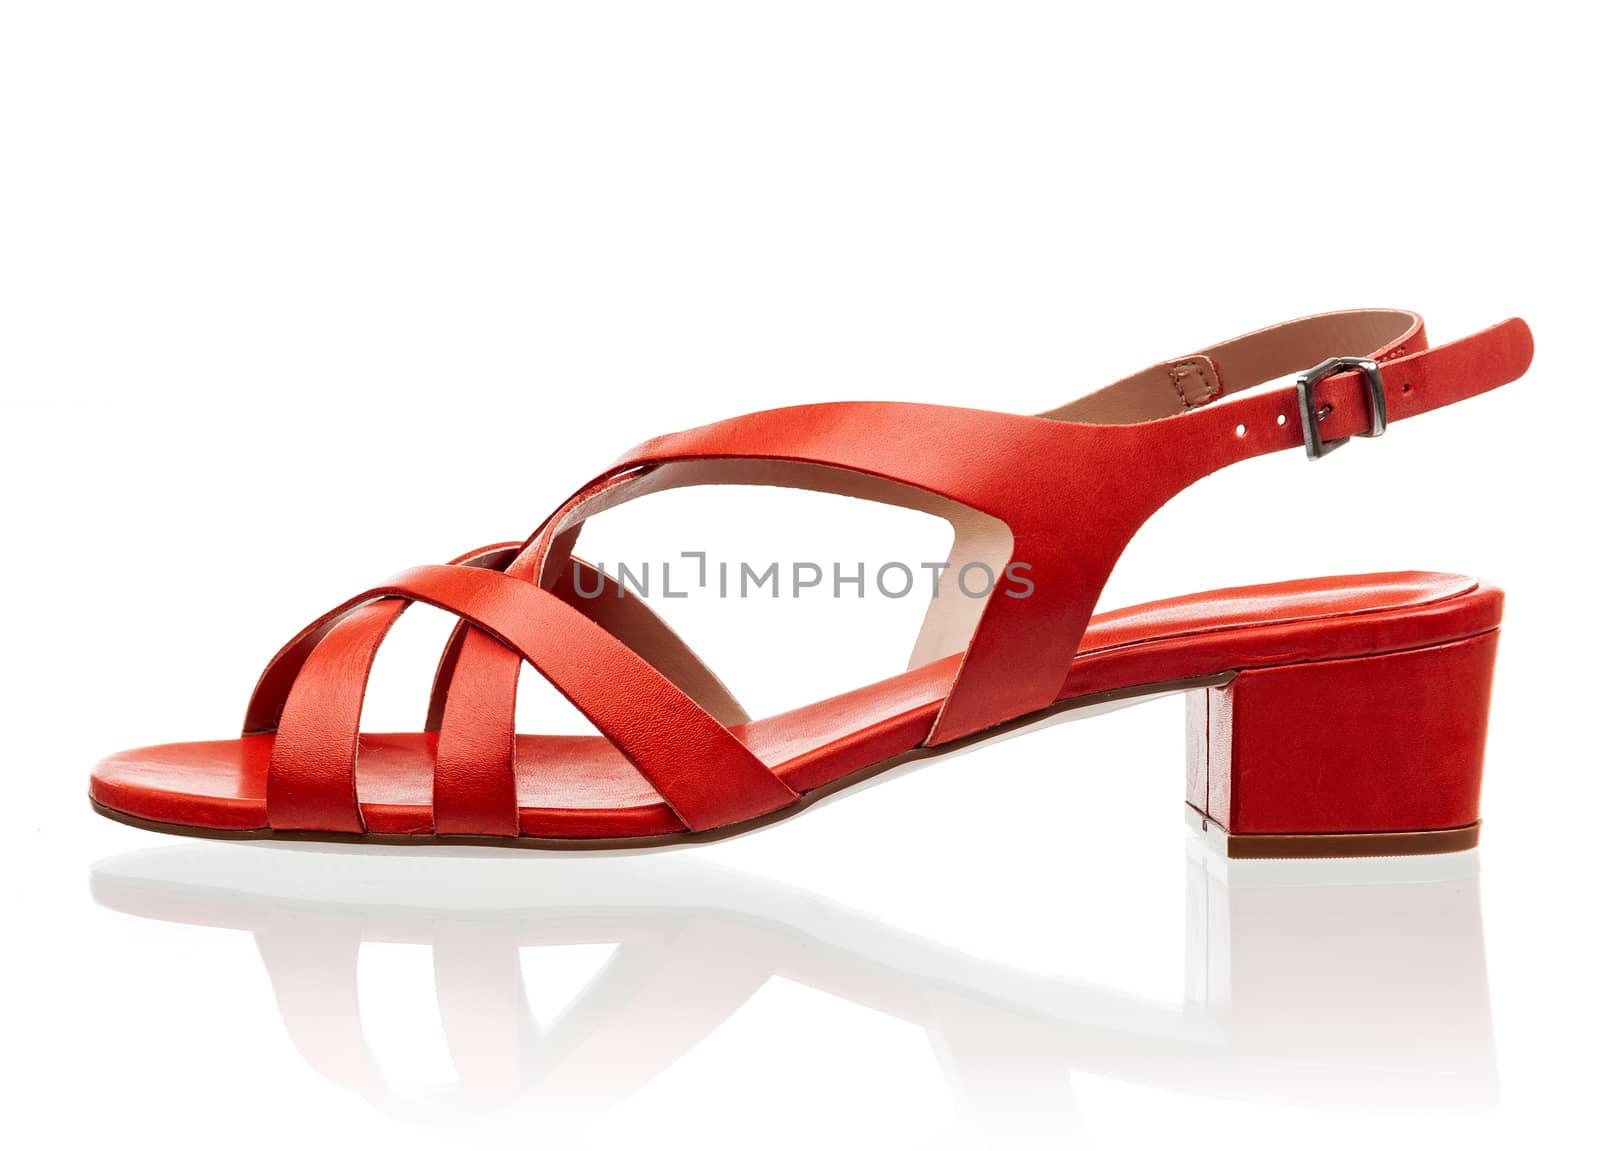 Red female sandal isolated over white background by photobac